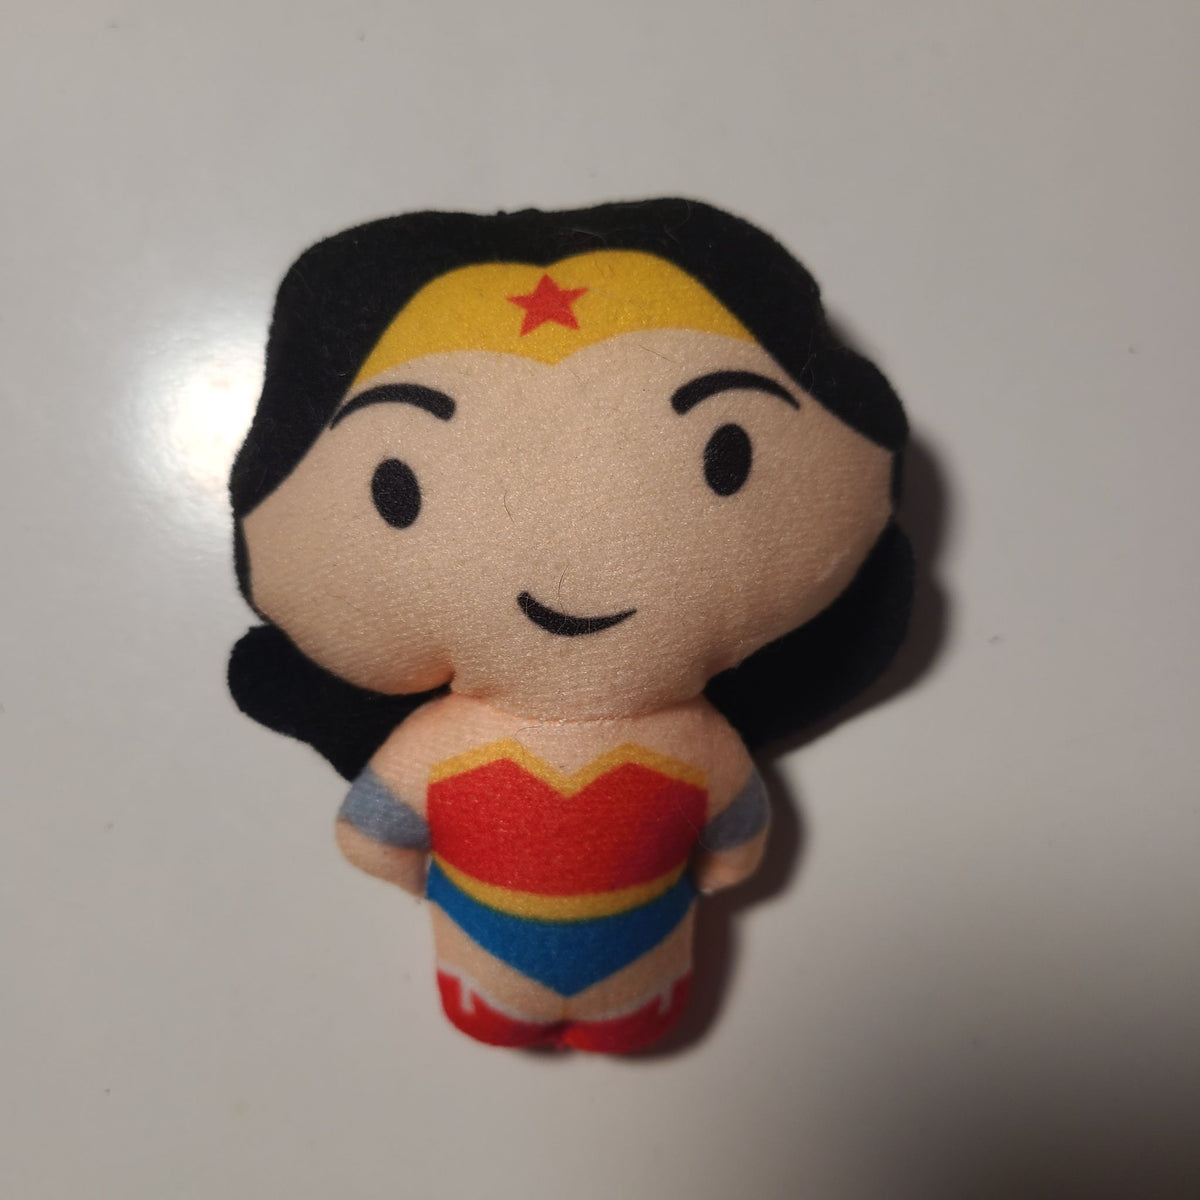 Wonder Woman  - Justice League DC Super Heroes by McDonalds Happy Meal Toys 2021 - 1